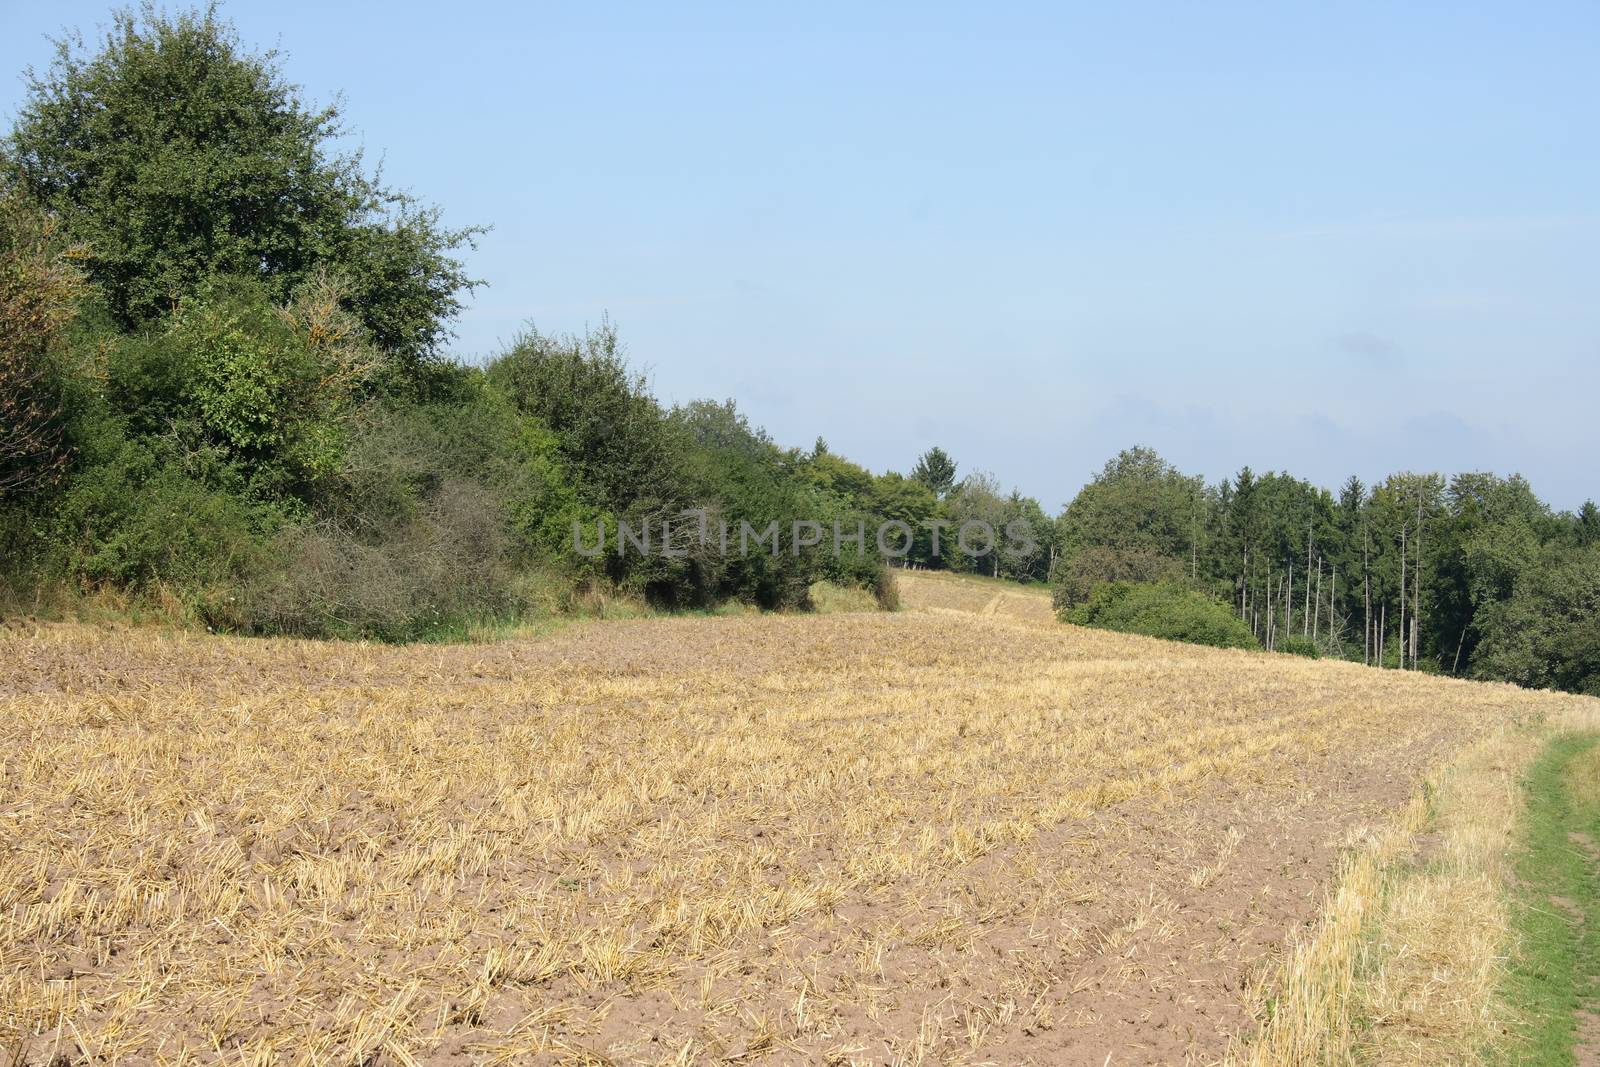 Harvested grain field with a forest in the background